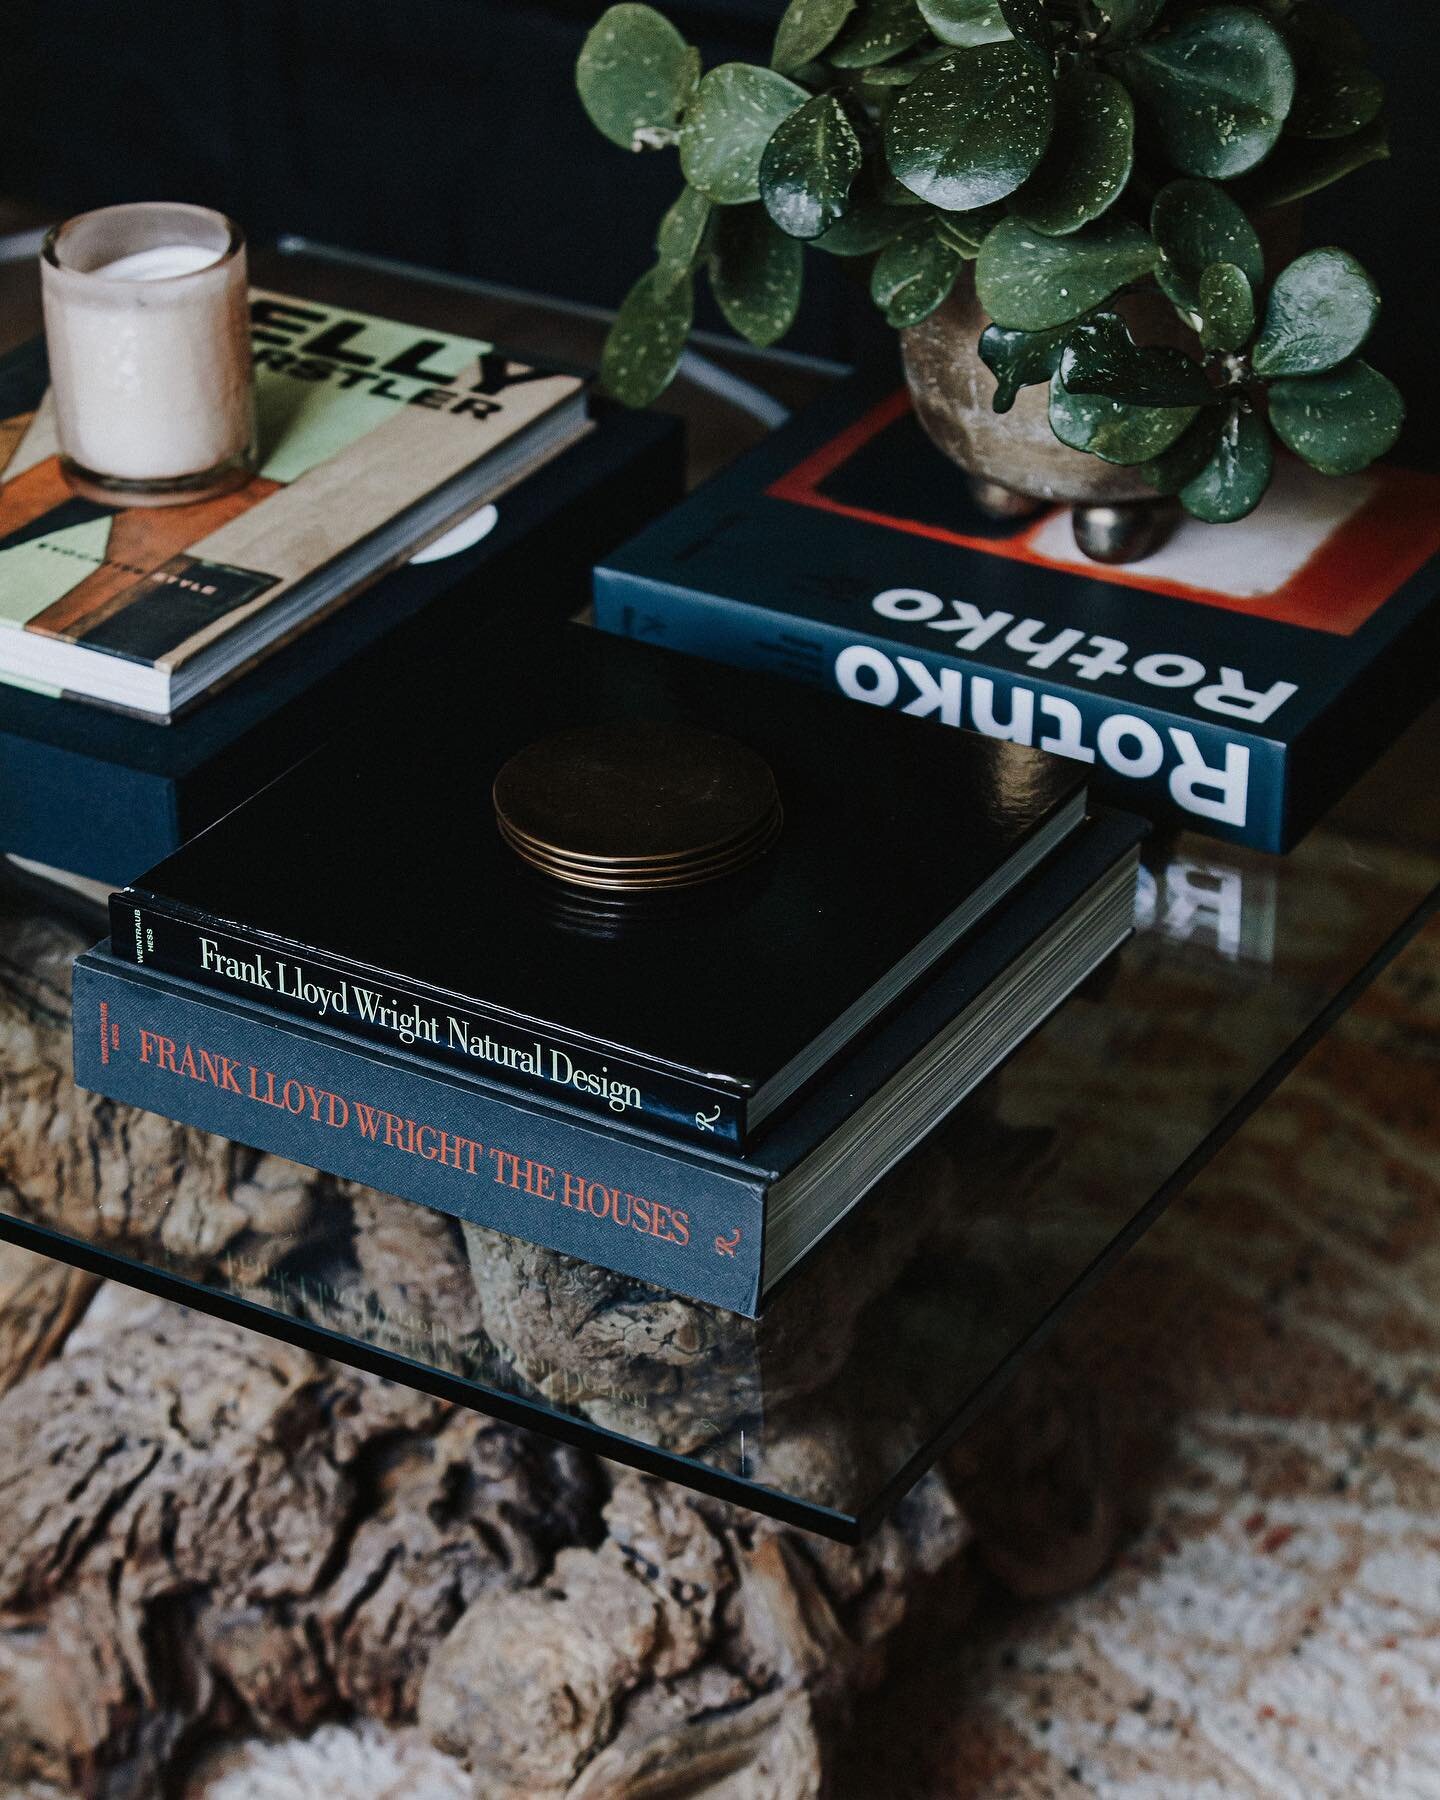 &bull; The art of styling: the final layer and often what brings a space to life. Decor + styling should have character and be a reflection of those residing in the home. Coffee table books beautifully bound with linen covers and a great spine, delic